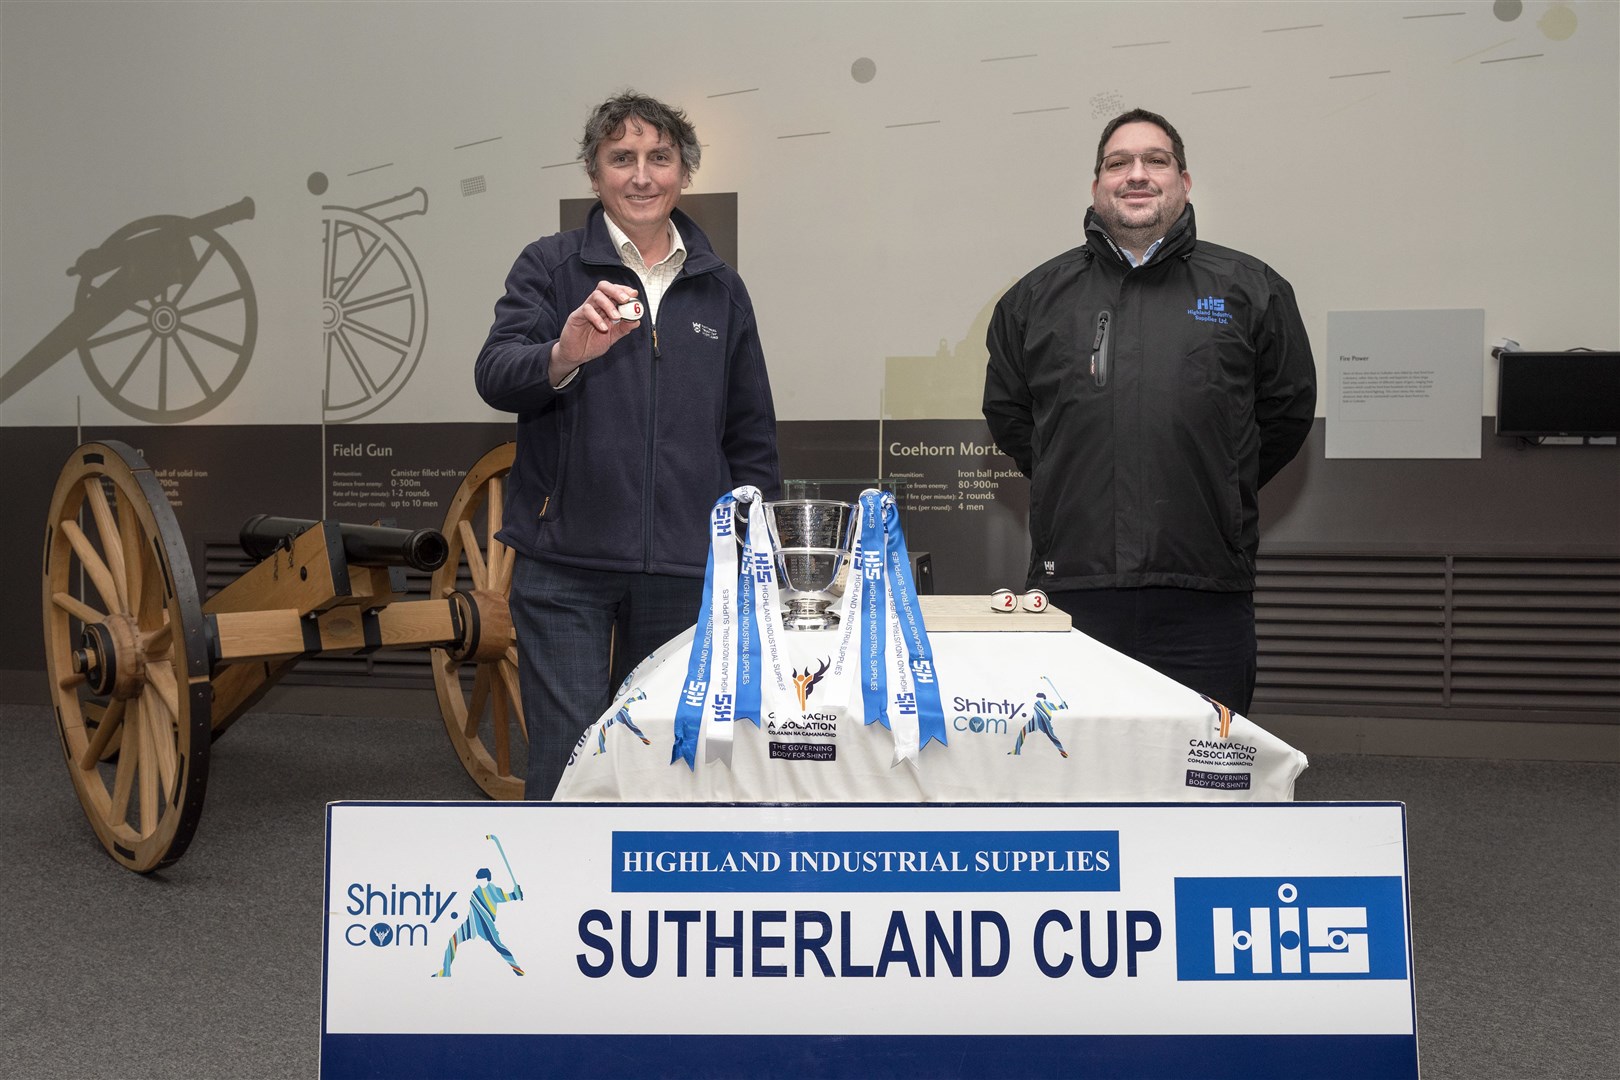 Raoul Curtis-Machin (left) of Culloden Battlefield, and Garry Mackintosh, Director of Highland Industrial Supplies, draw the balls in the HIS Sutherland Cup at Culloden Battlefield Visitor Centre. Picture: Neil G Paterson.